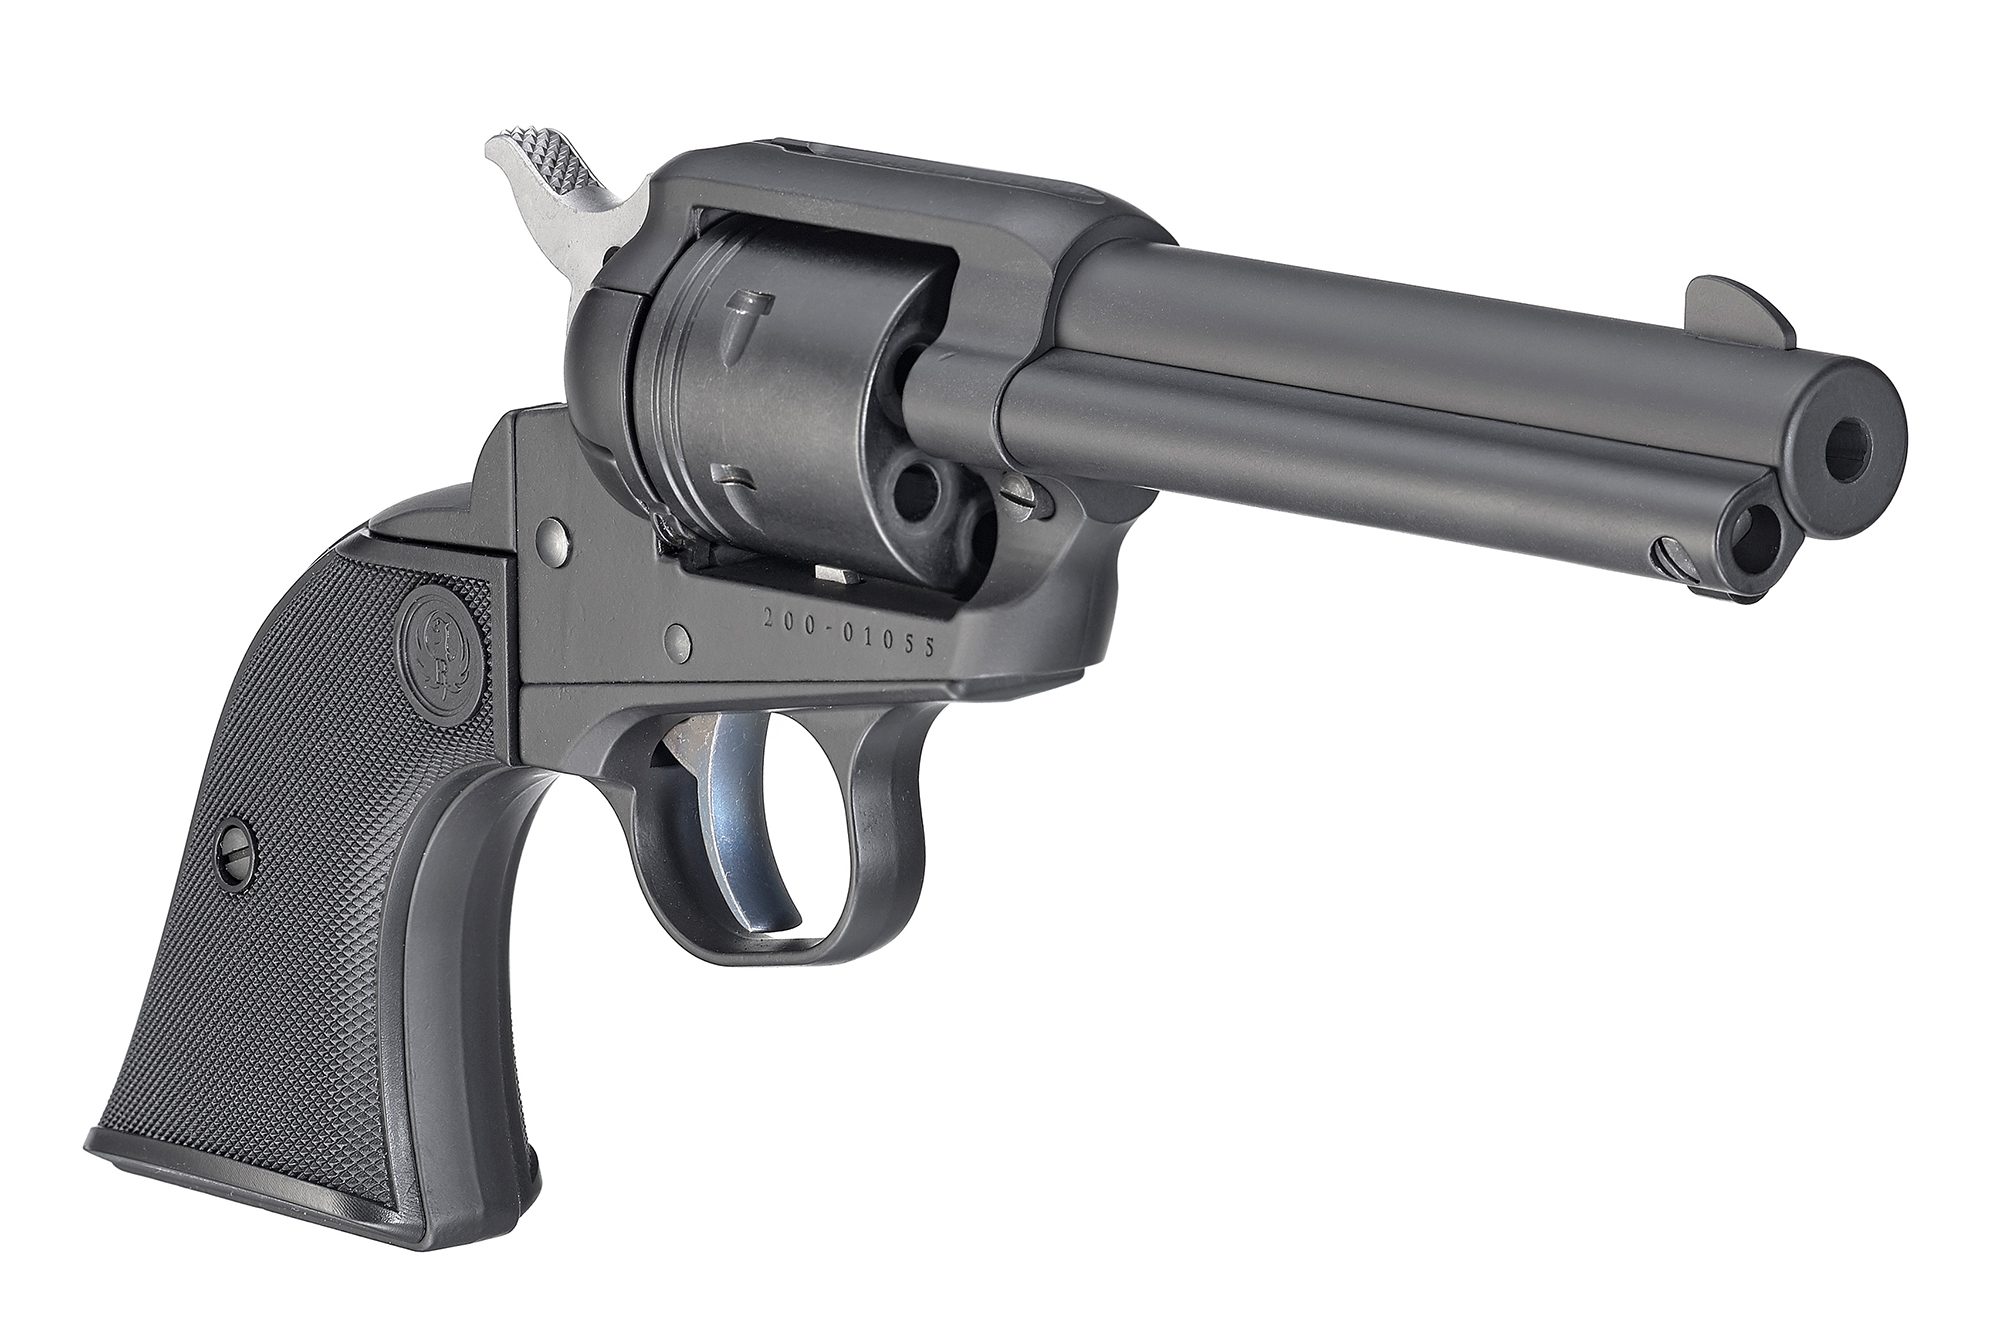 Ruger Releases the Wrangler .22LR Single-Action Revolver | RECOIL